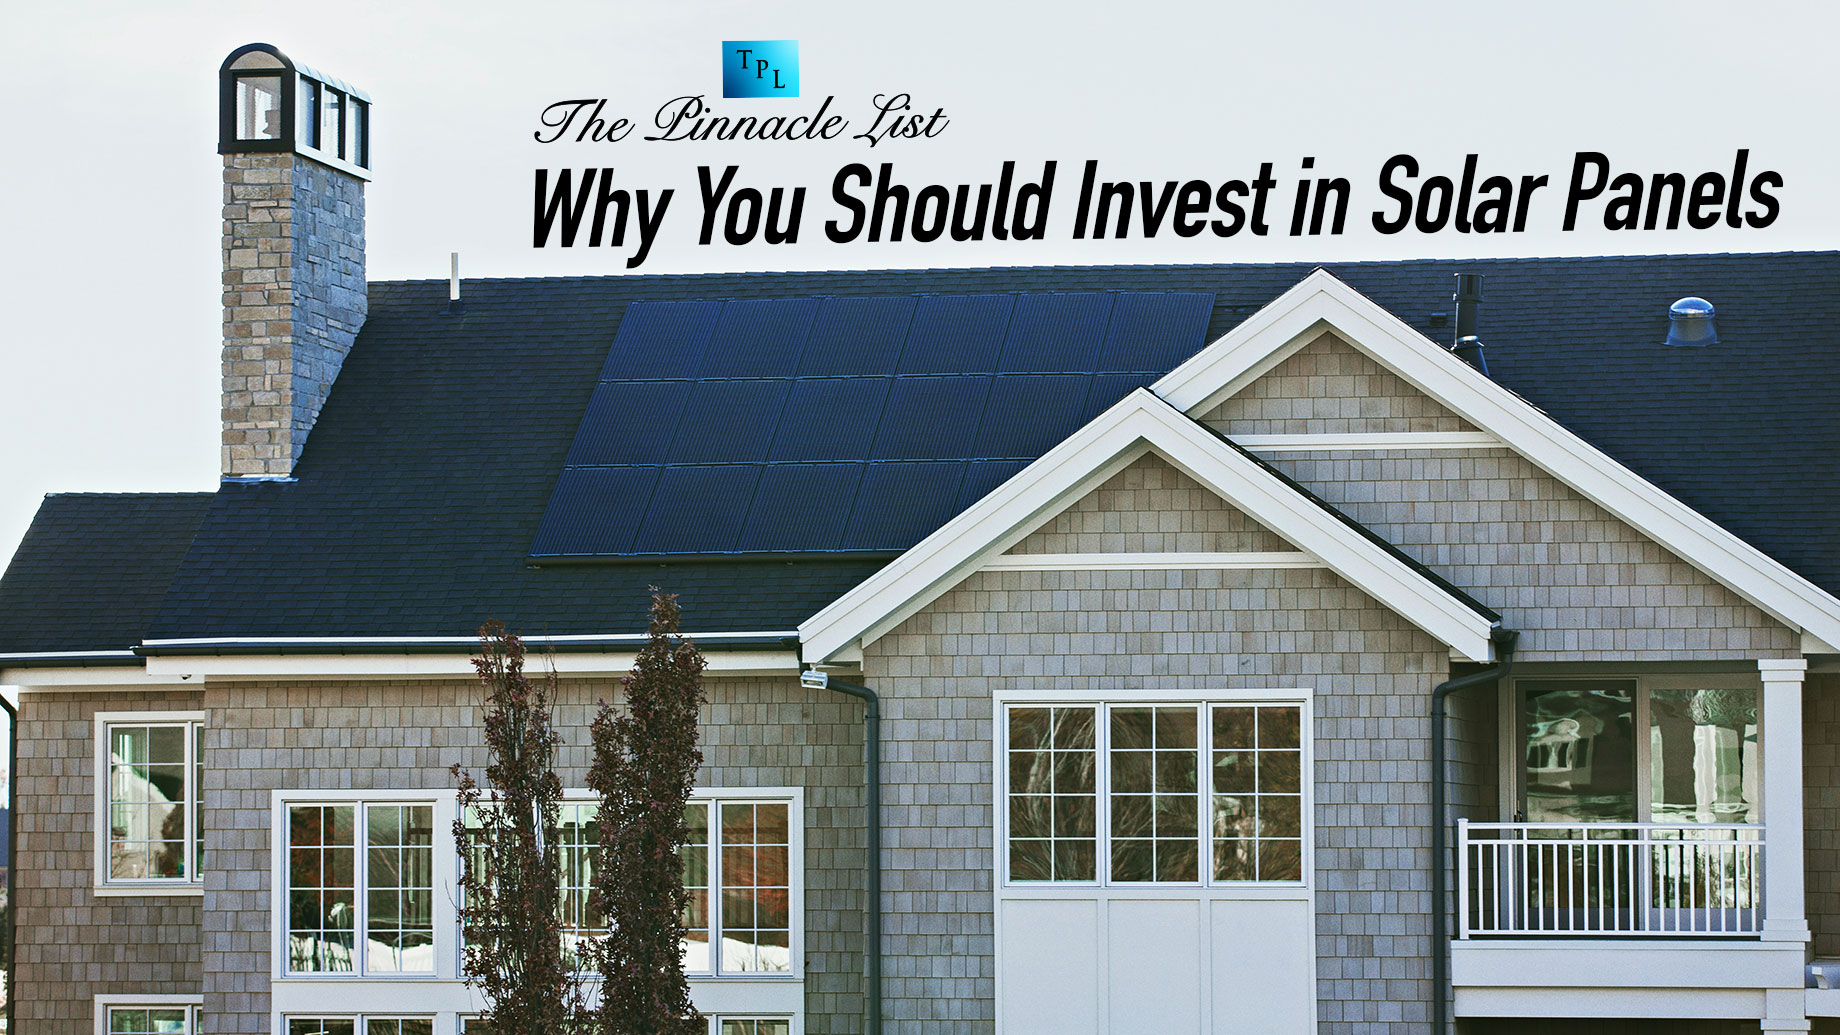 Why You Should Invest in Solar Panels